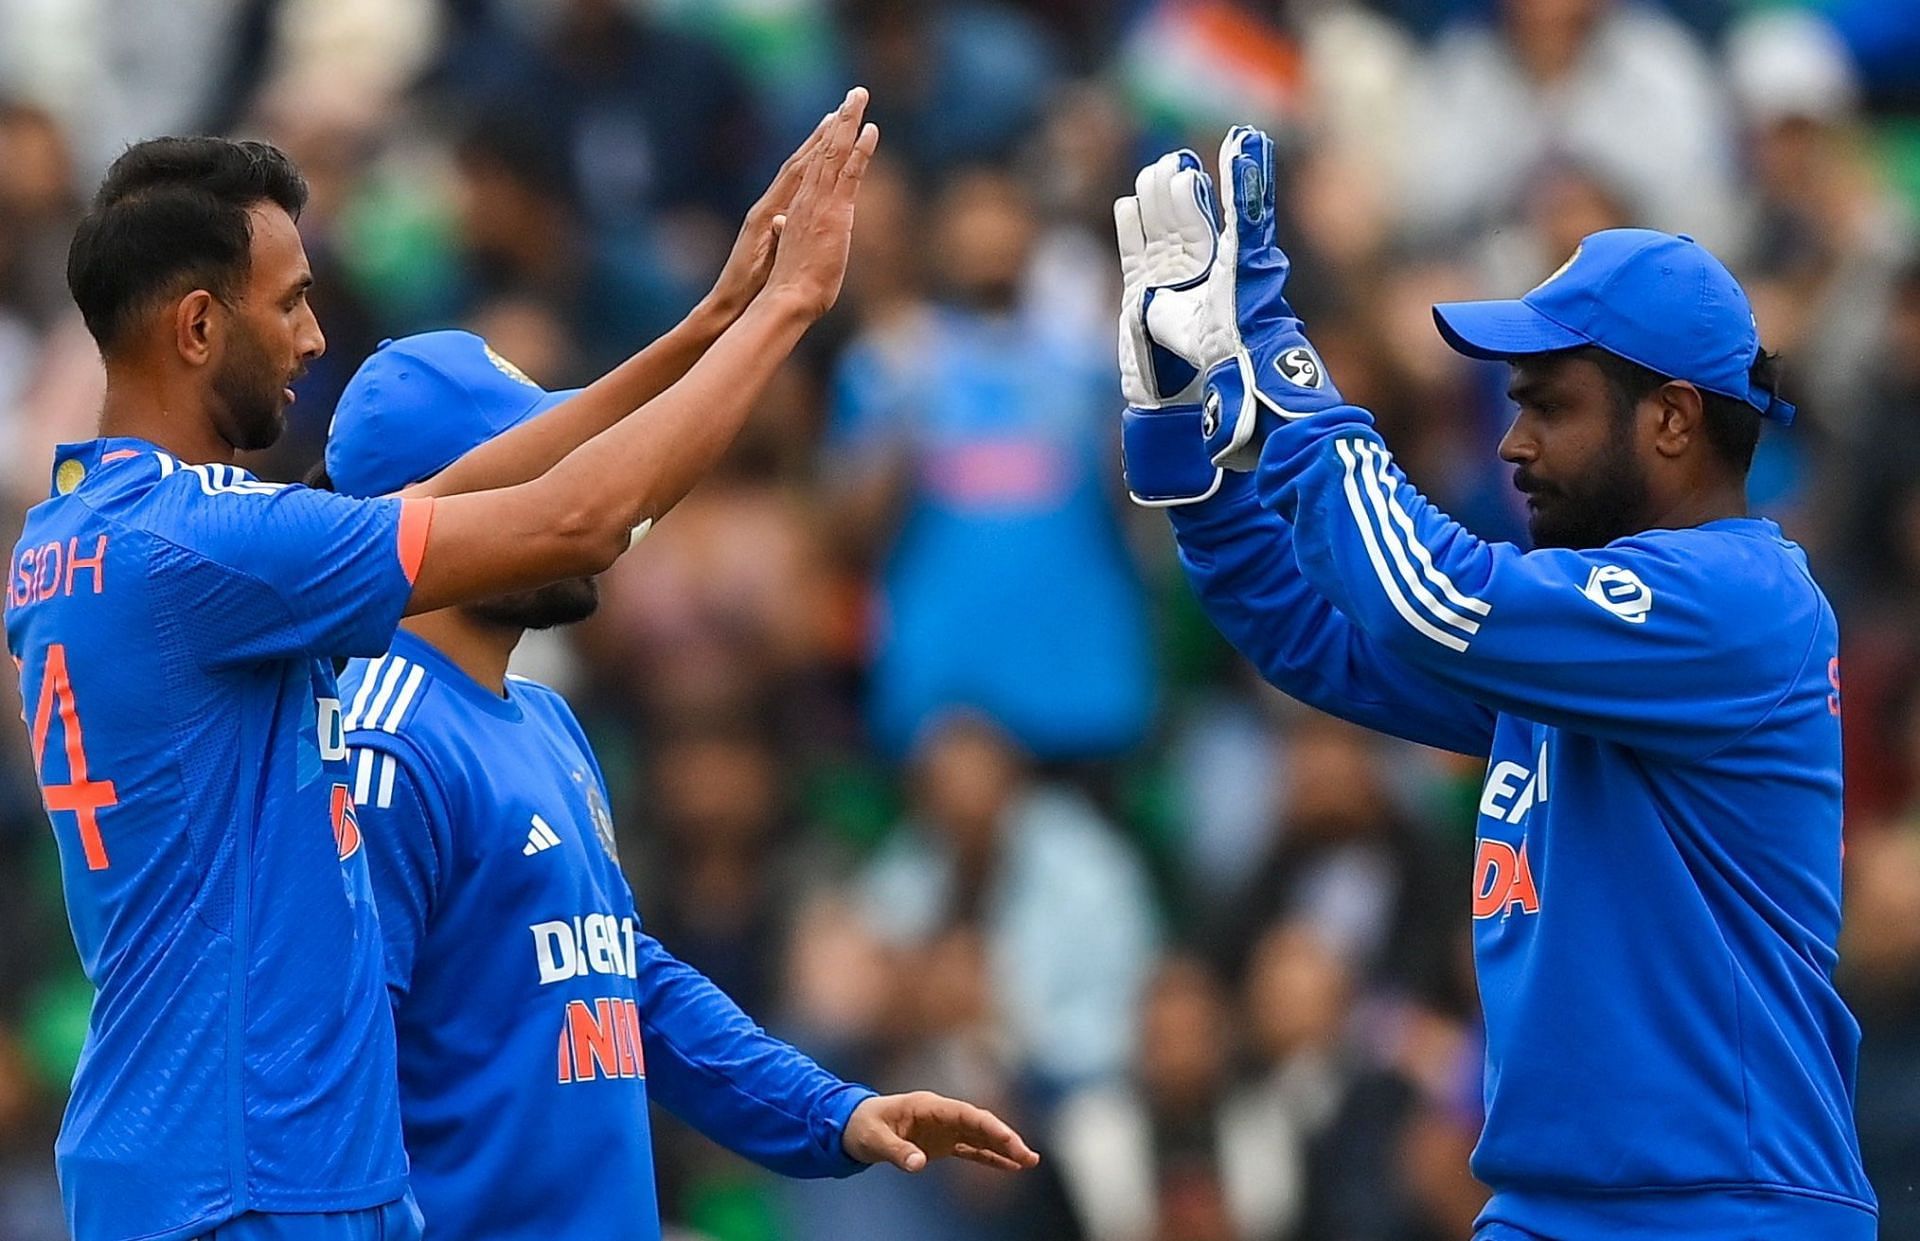 Prasidh Krishna and Sanju Samson are in line to be rested for the final T20I